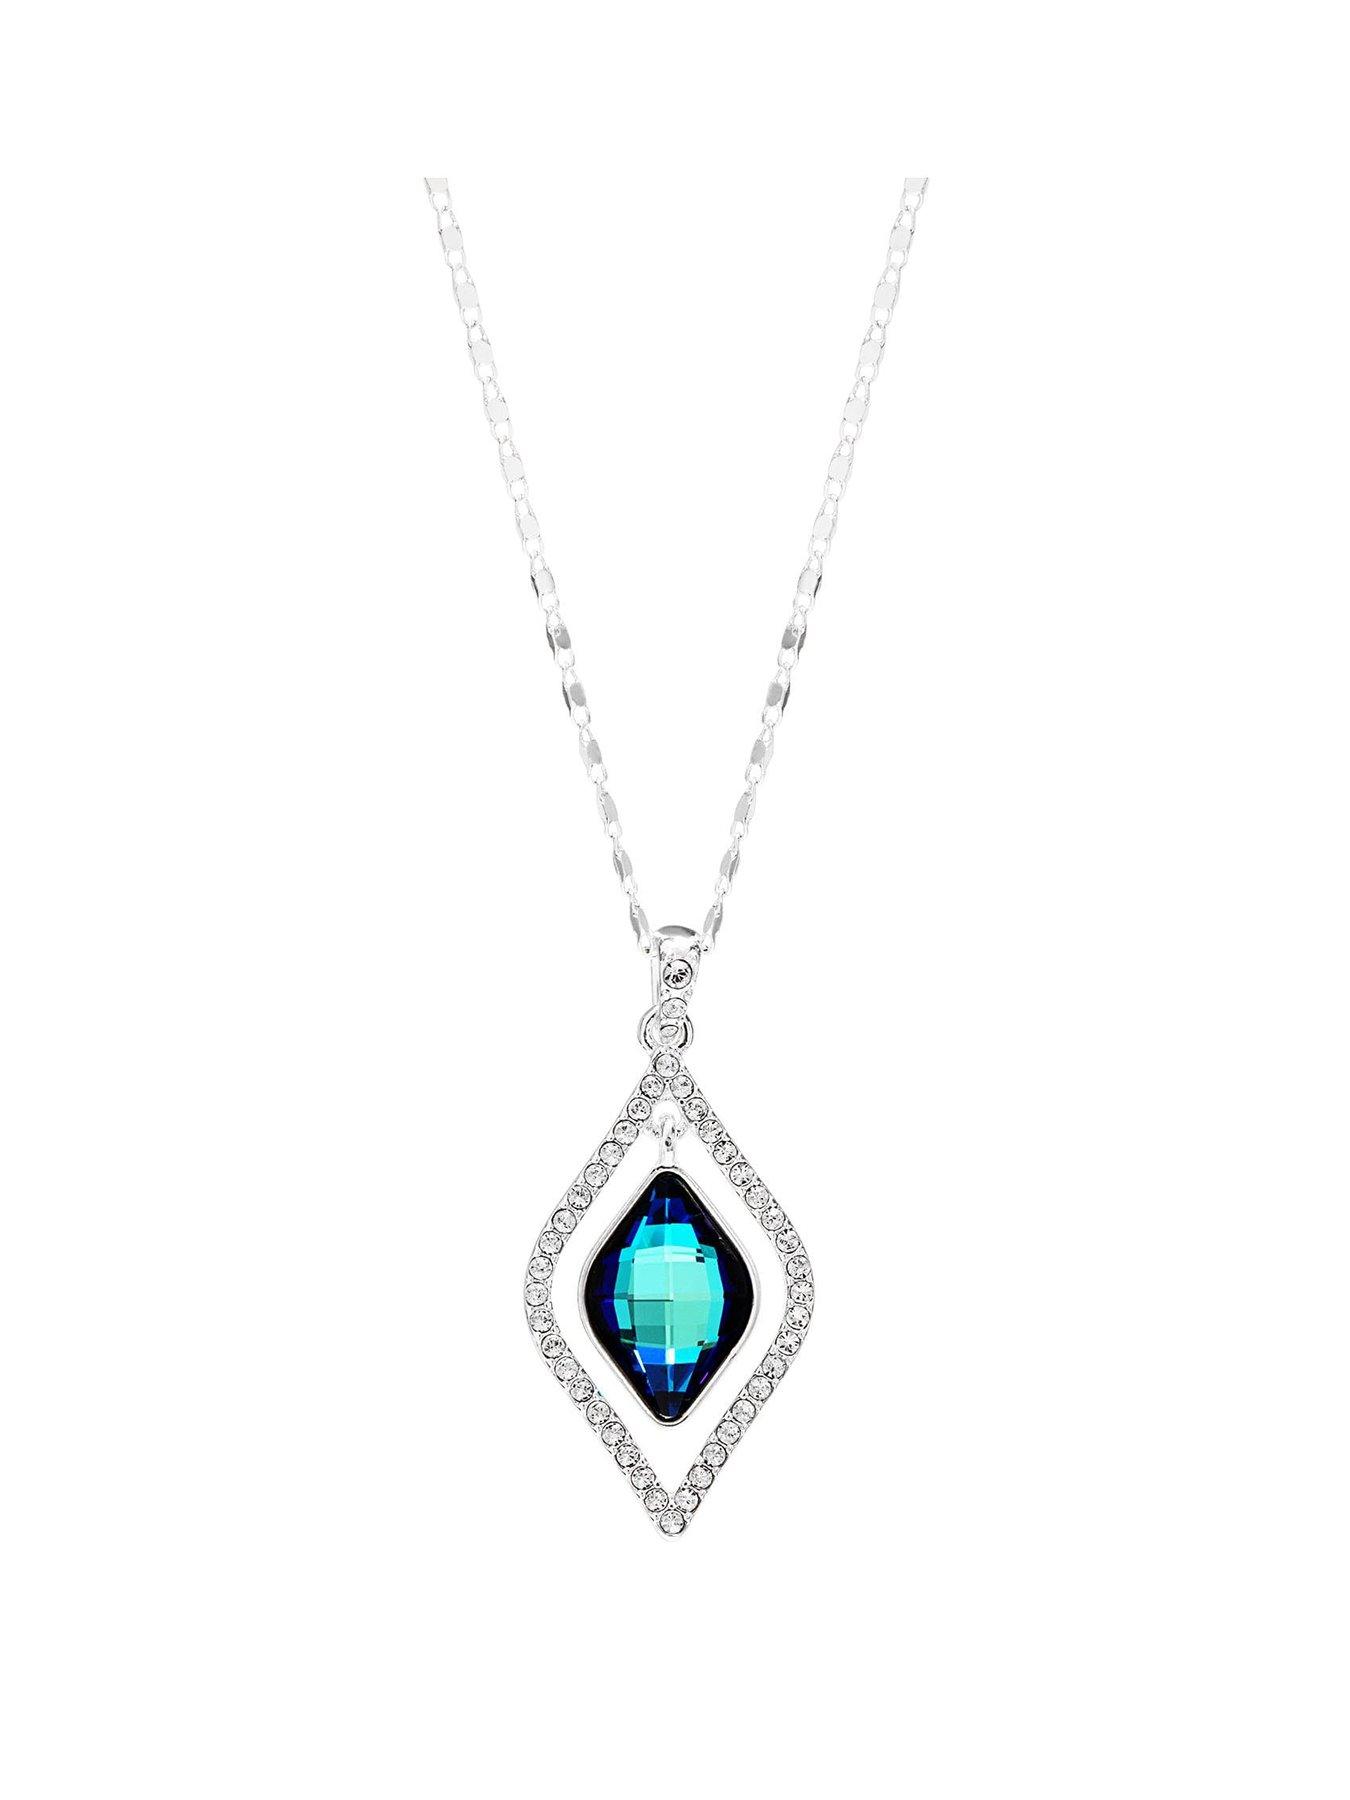  Sterling Silver Crystal Pendant with Blue Bermuda Stone